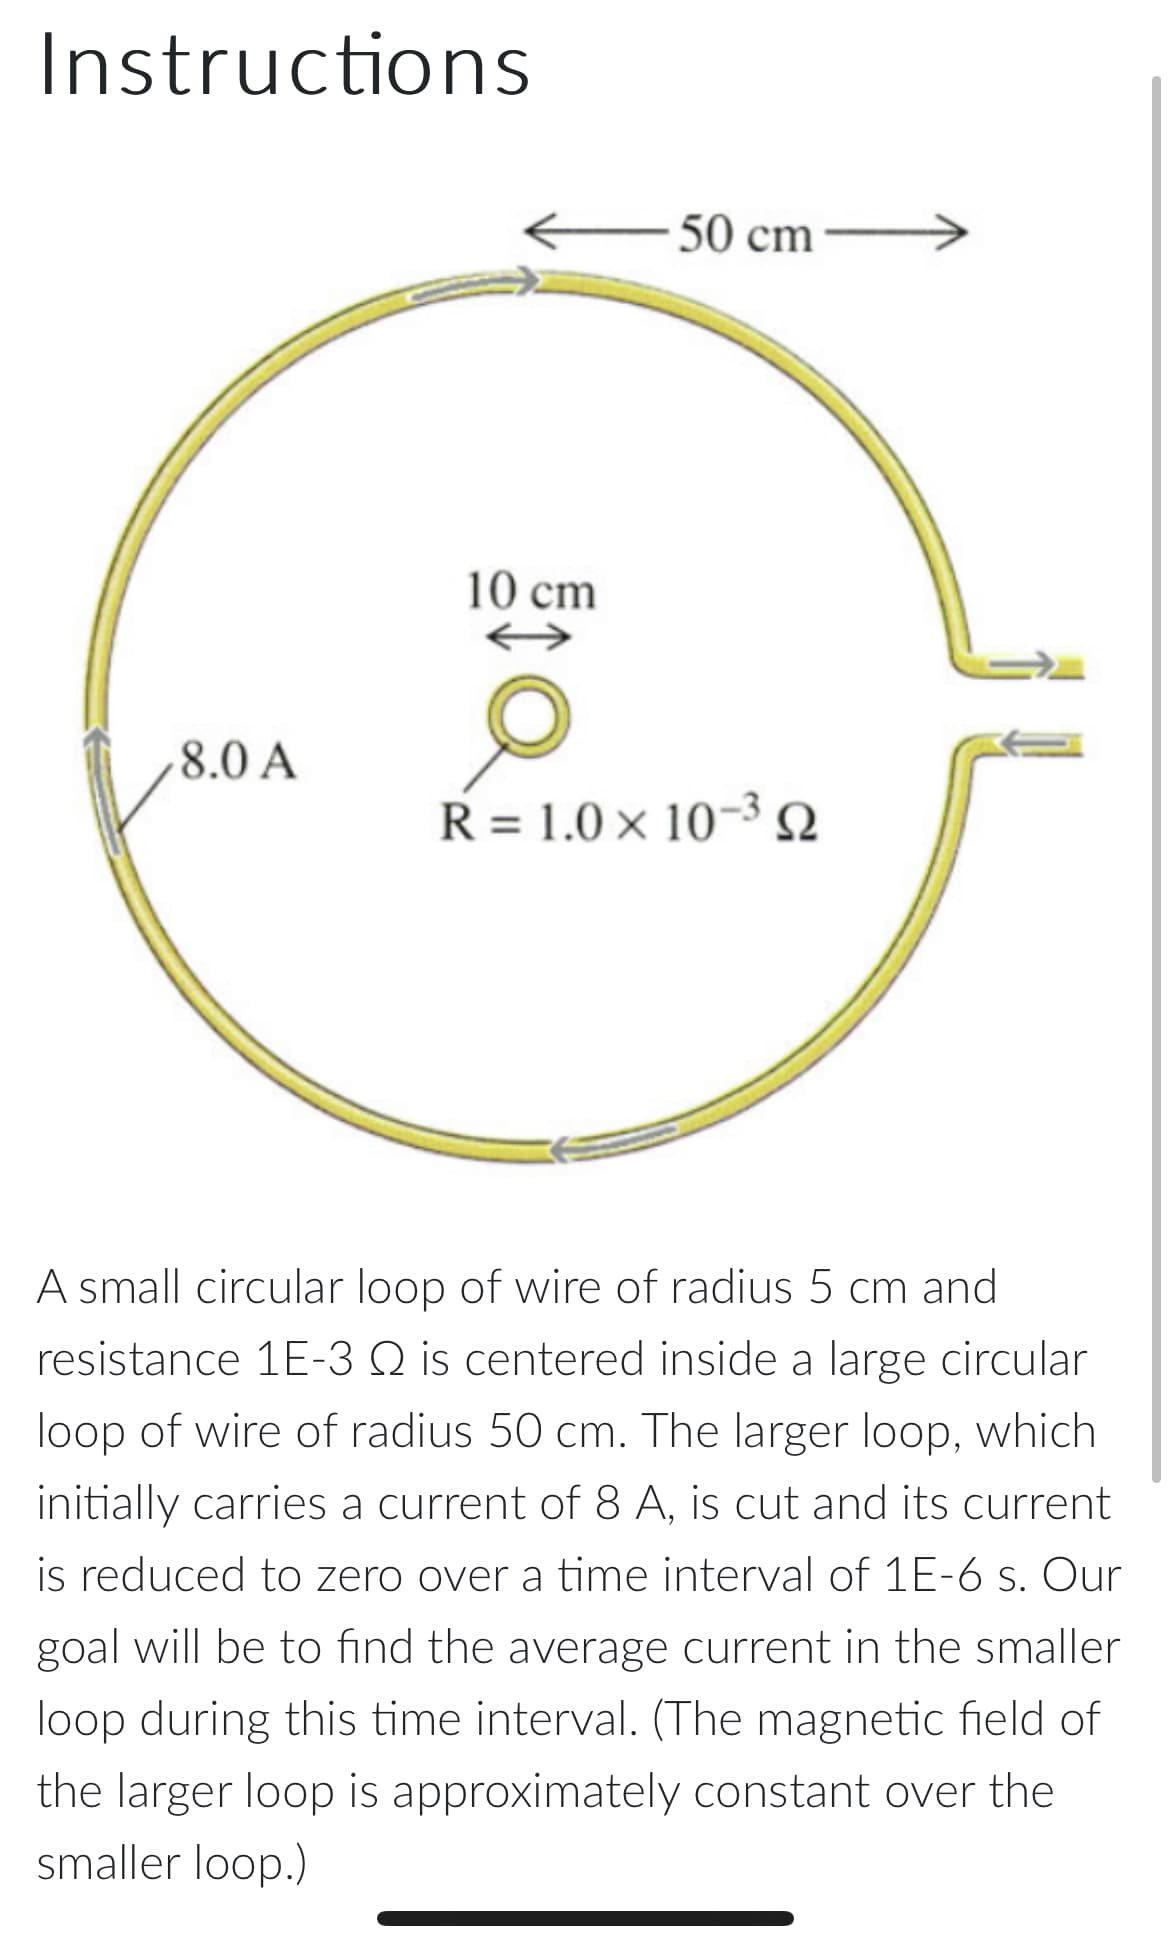 Instructions
50 cm
10 cm
8.0 A
R = 1.0 × 10-3 N
A small circular loop of wire of radius 5 cm and
resistance 1E-3 Q is centered inside a large circular
loop of wire of radius 50 cm. The larger loop, which
initially carries a current of 8 A, is cut and its current
is reduced to zero over a time interval of 1E-6 s. Our
goal will be to find the average current in the smaller
loop during this time interval. (The magnetic field of
the larger loop is approximately constant over the
smaller loop.)
